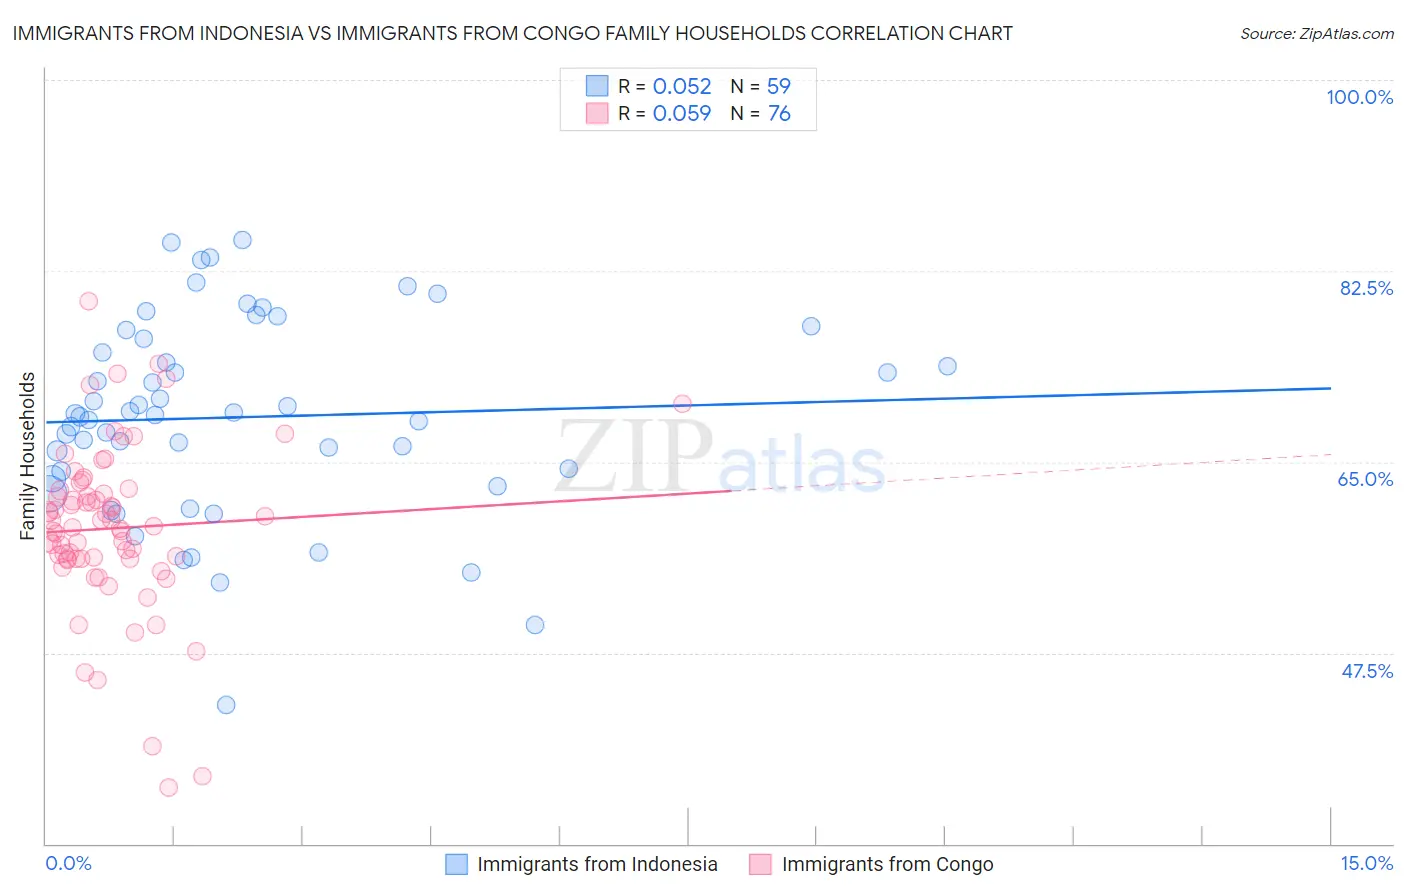 Immigrants from Indonesia vs Immigrants from Congo Family Households